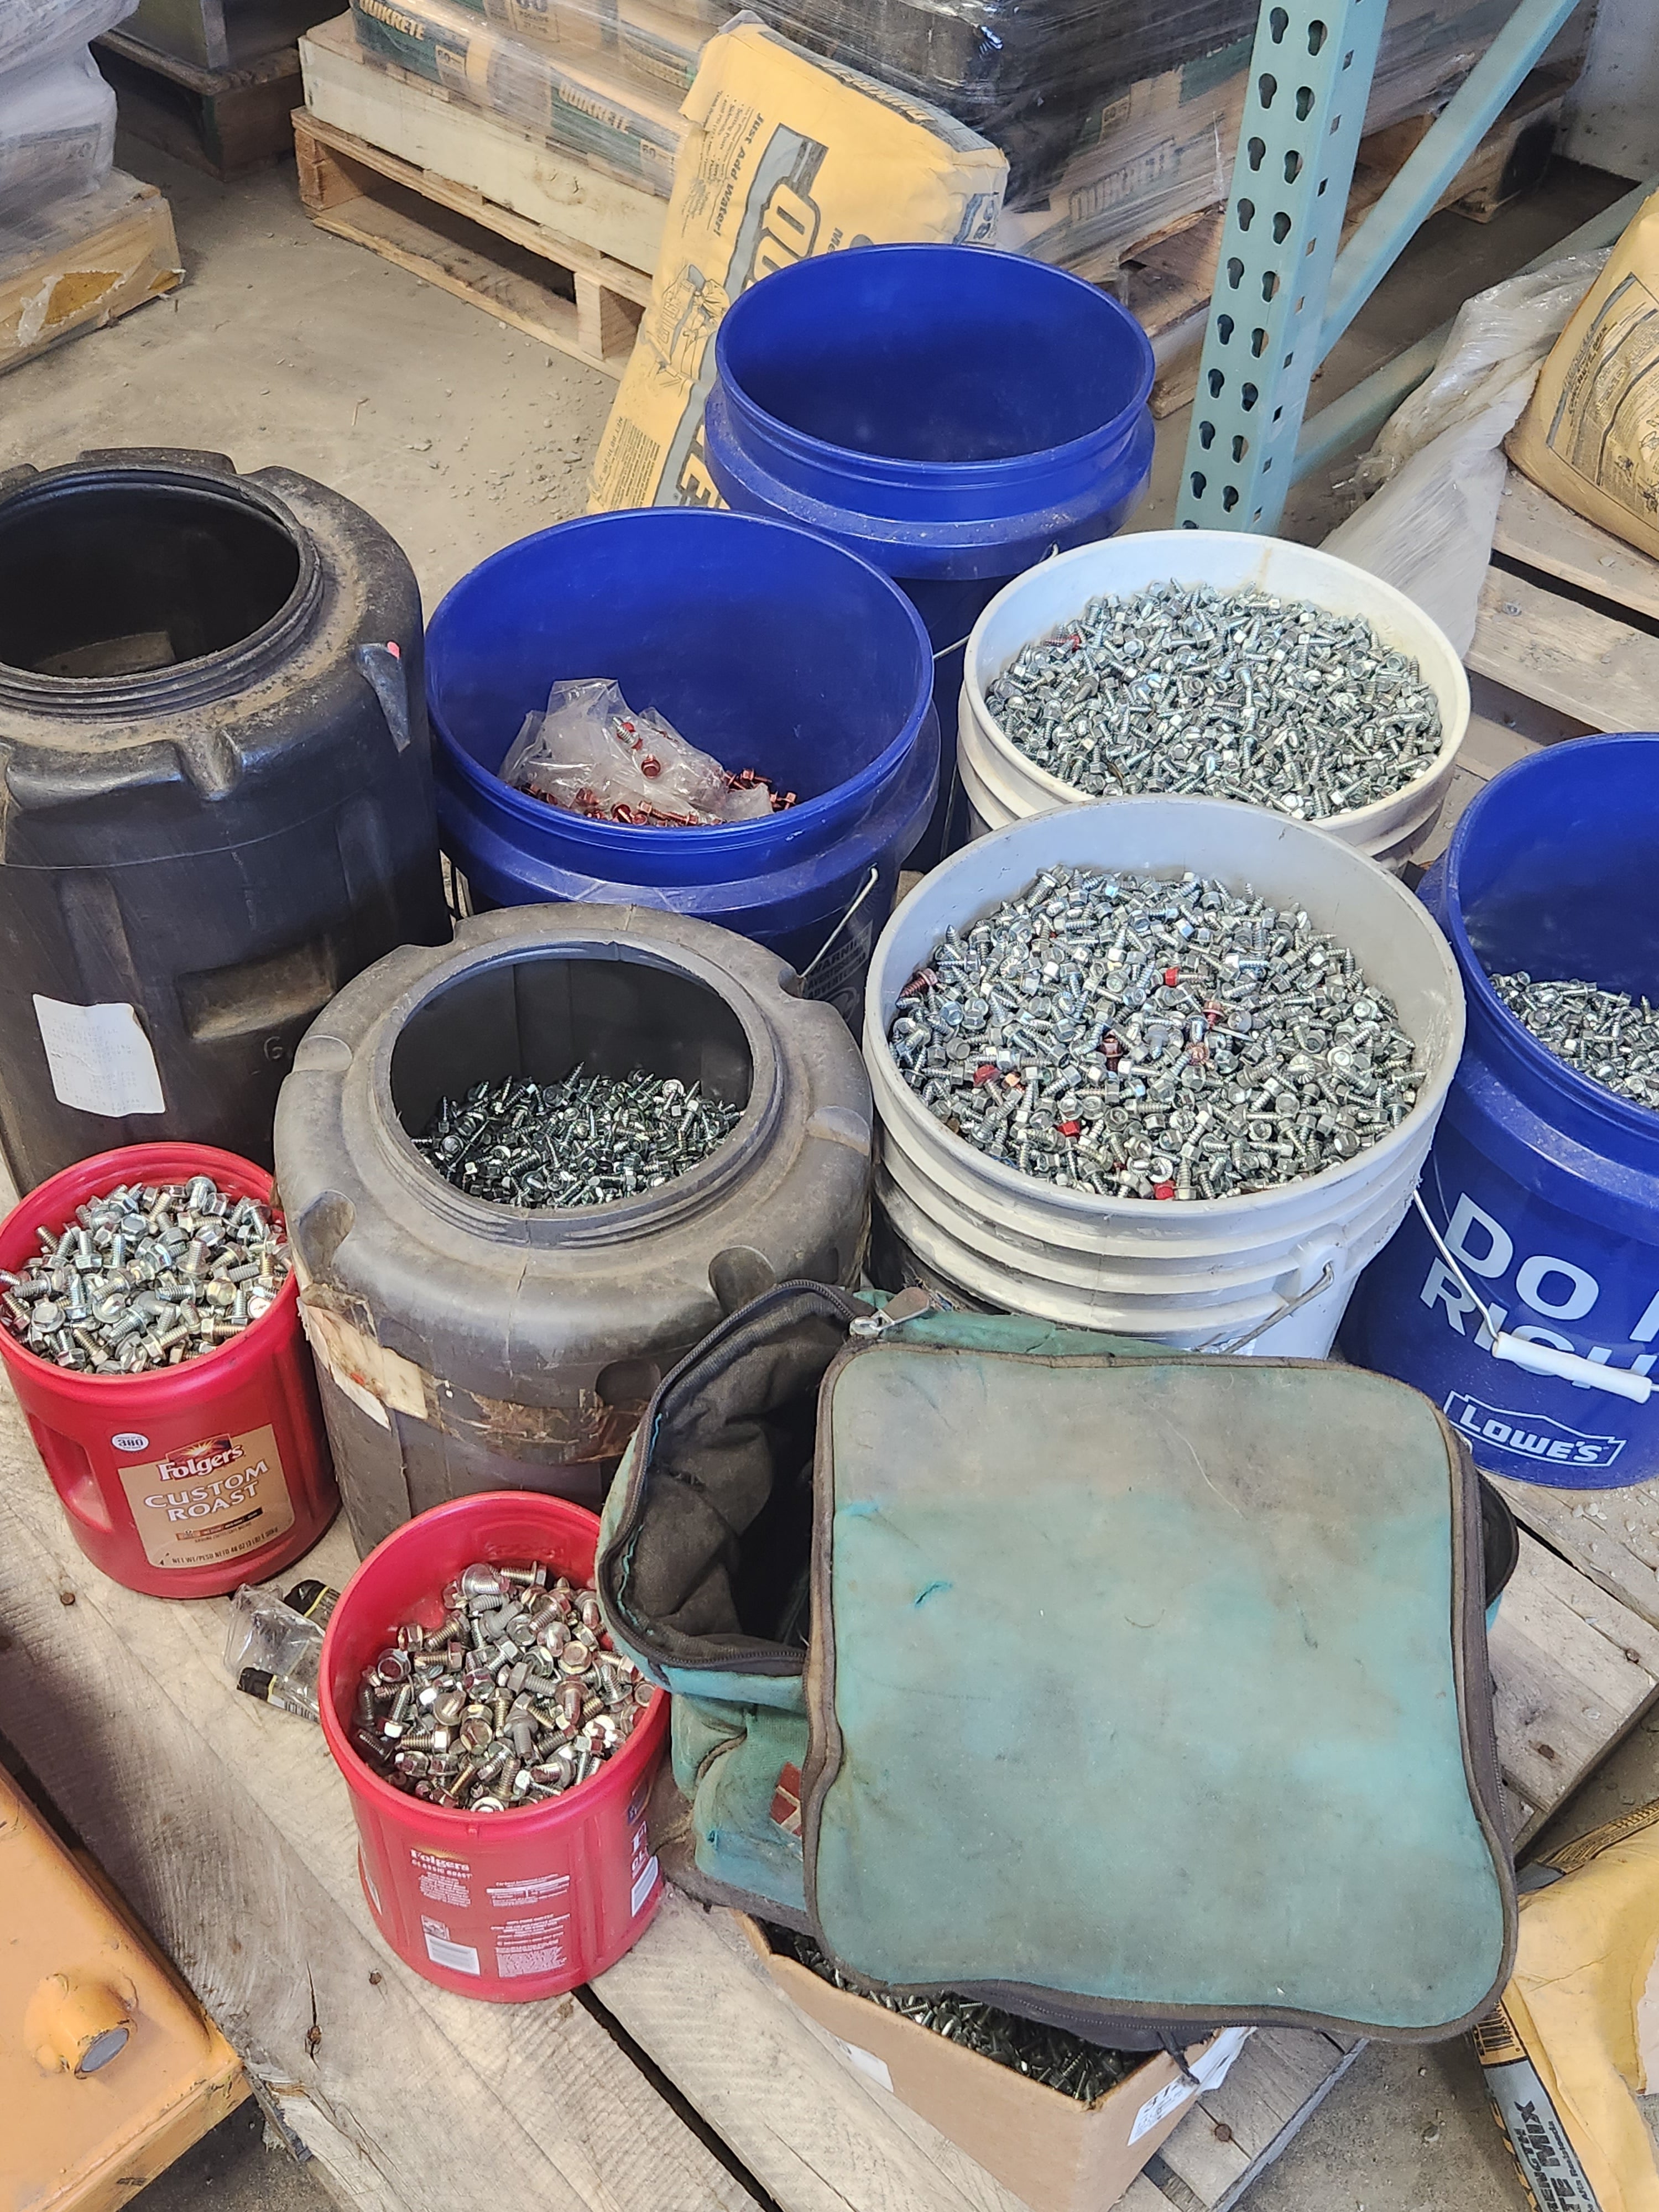 Miscellaneous Nuts & Bolts (Sold per Pound)